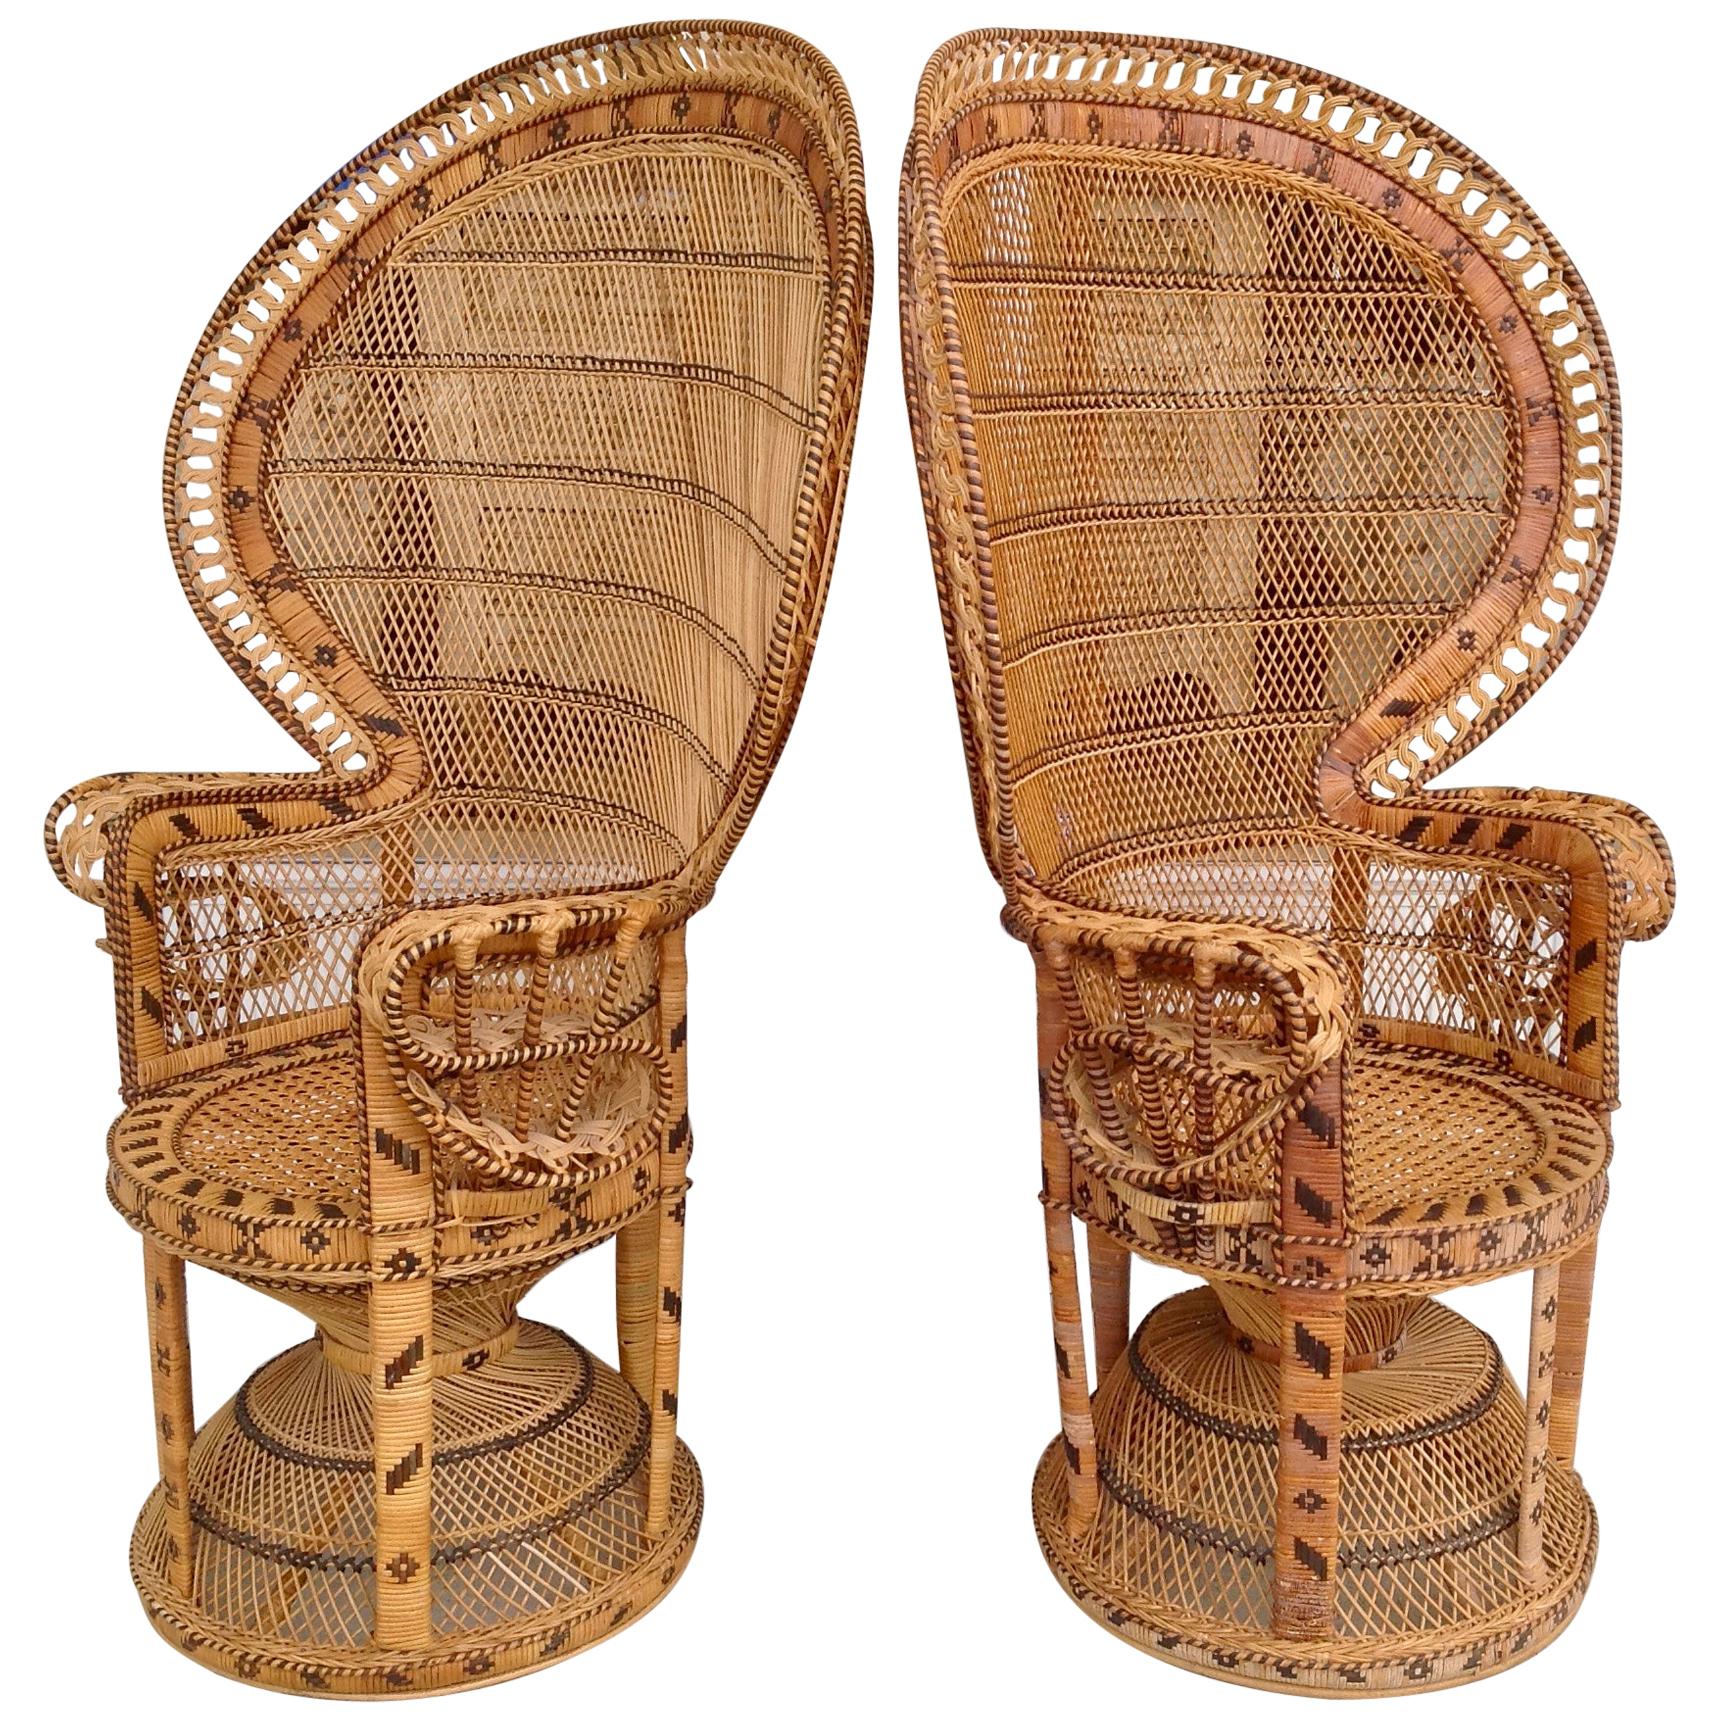 Pair of Decorated Woven Rattan Peacock Chairs